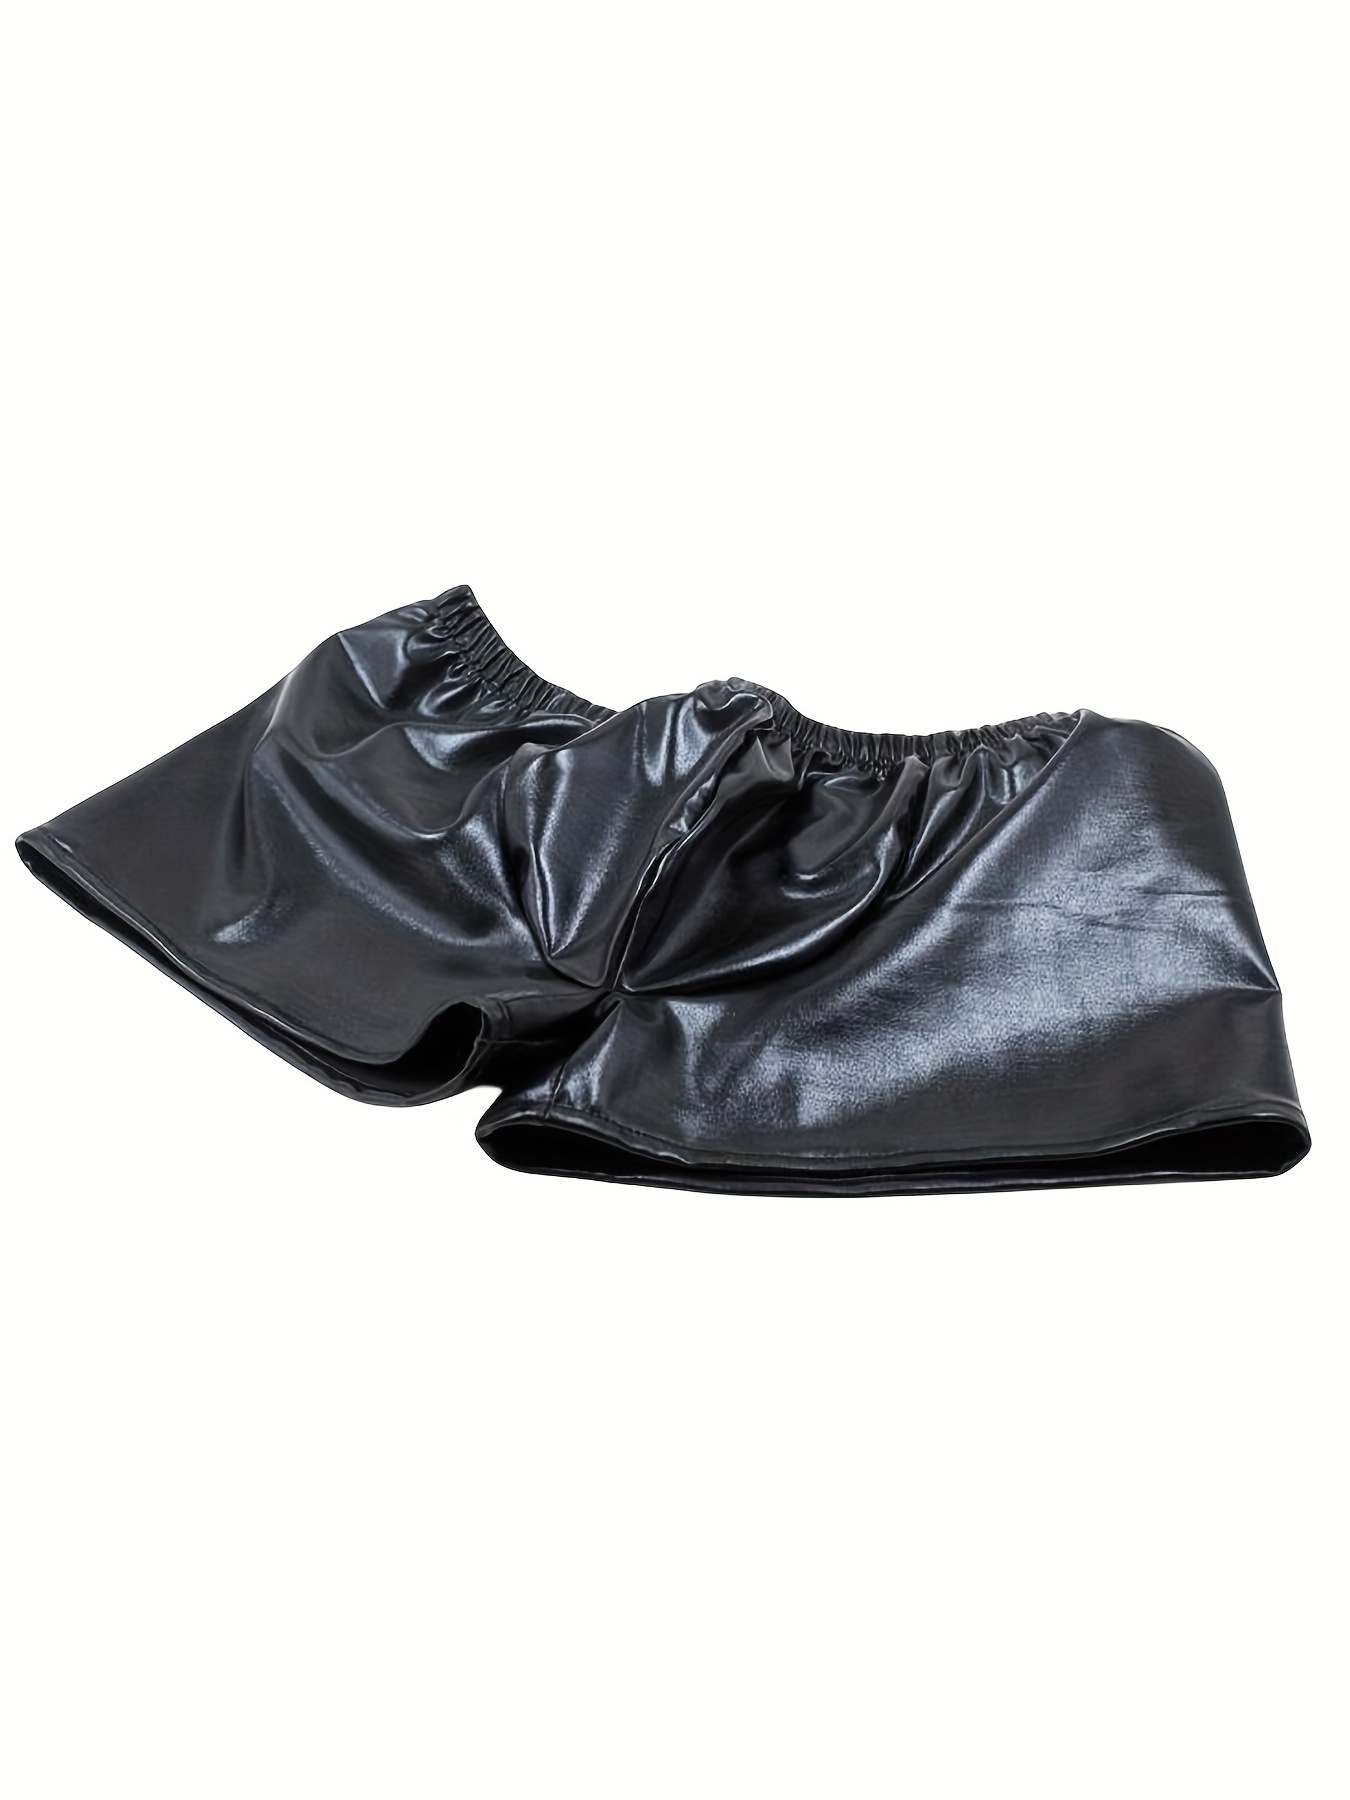  Faux Leather Boxer Briefs for Men Sexy Snap Crotch